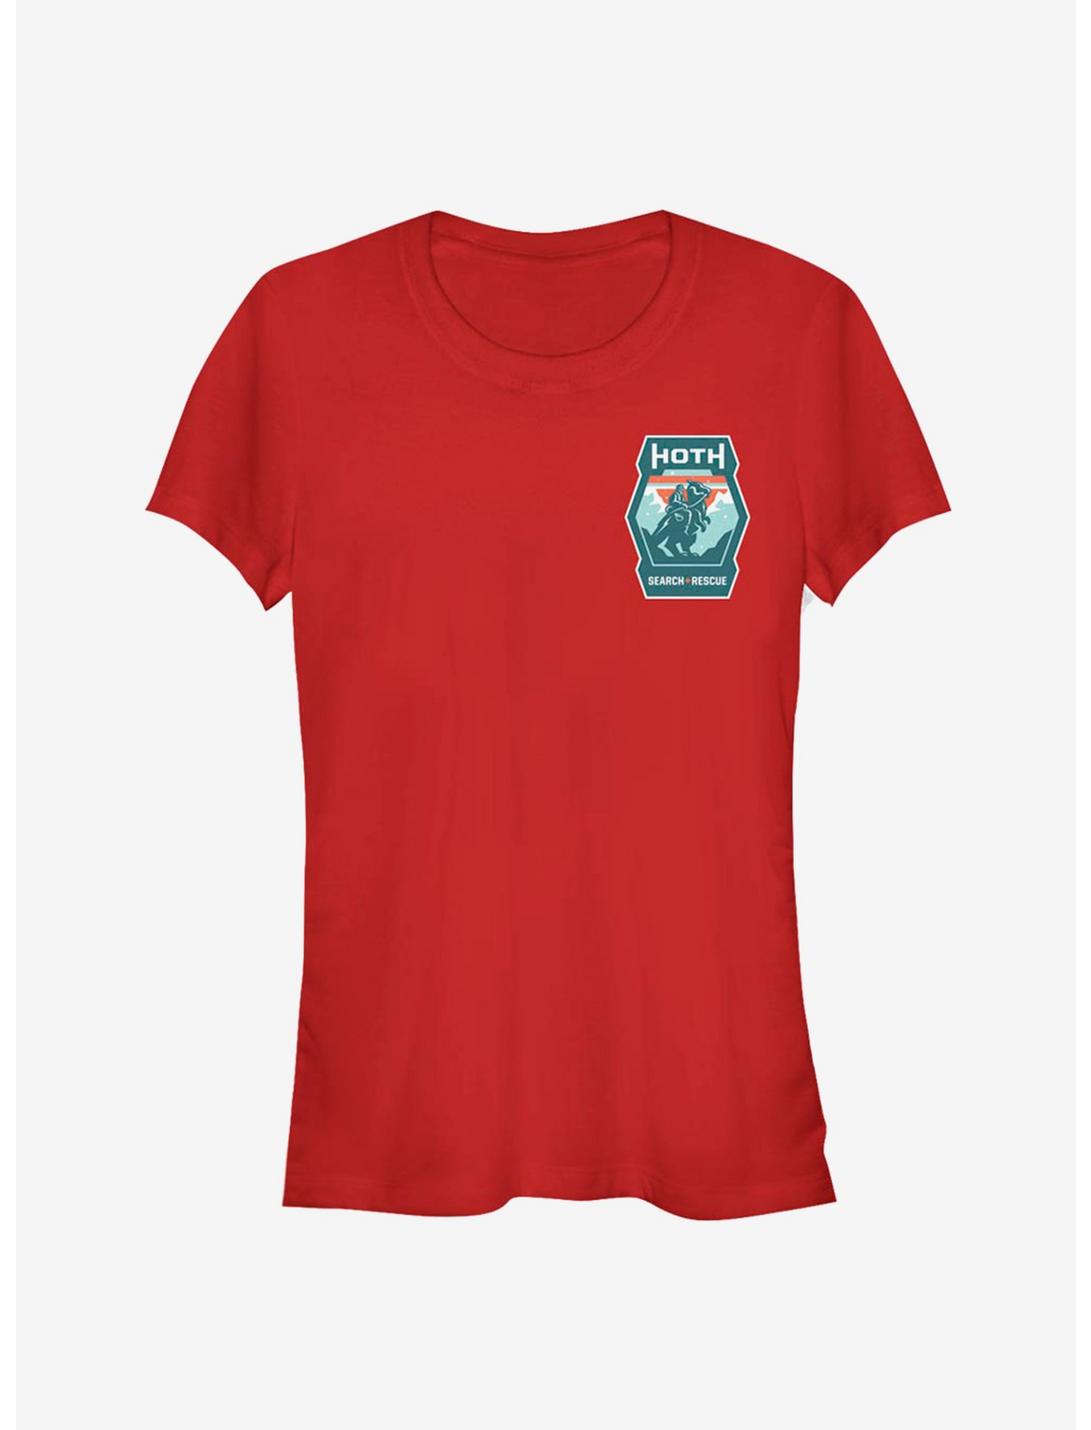 Star Wars Hoth Search Girls T-Shirt, RED, hi-res